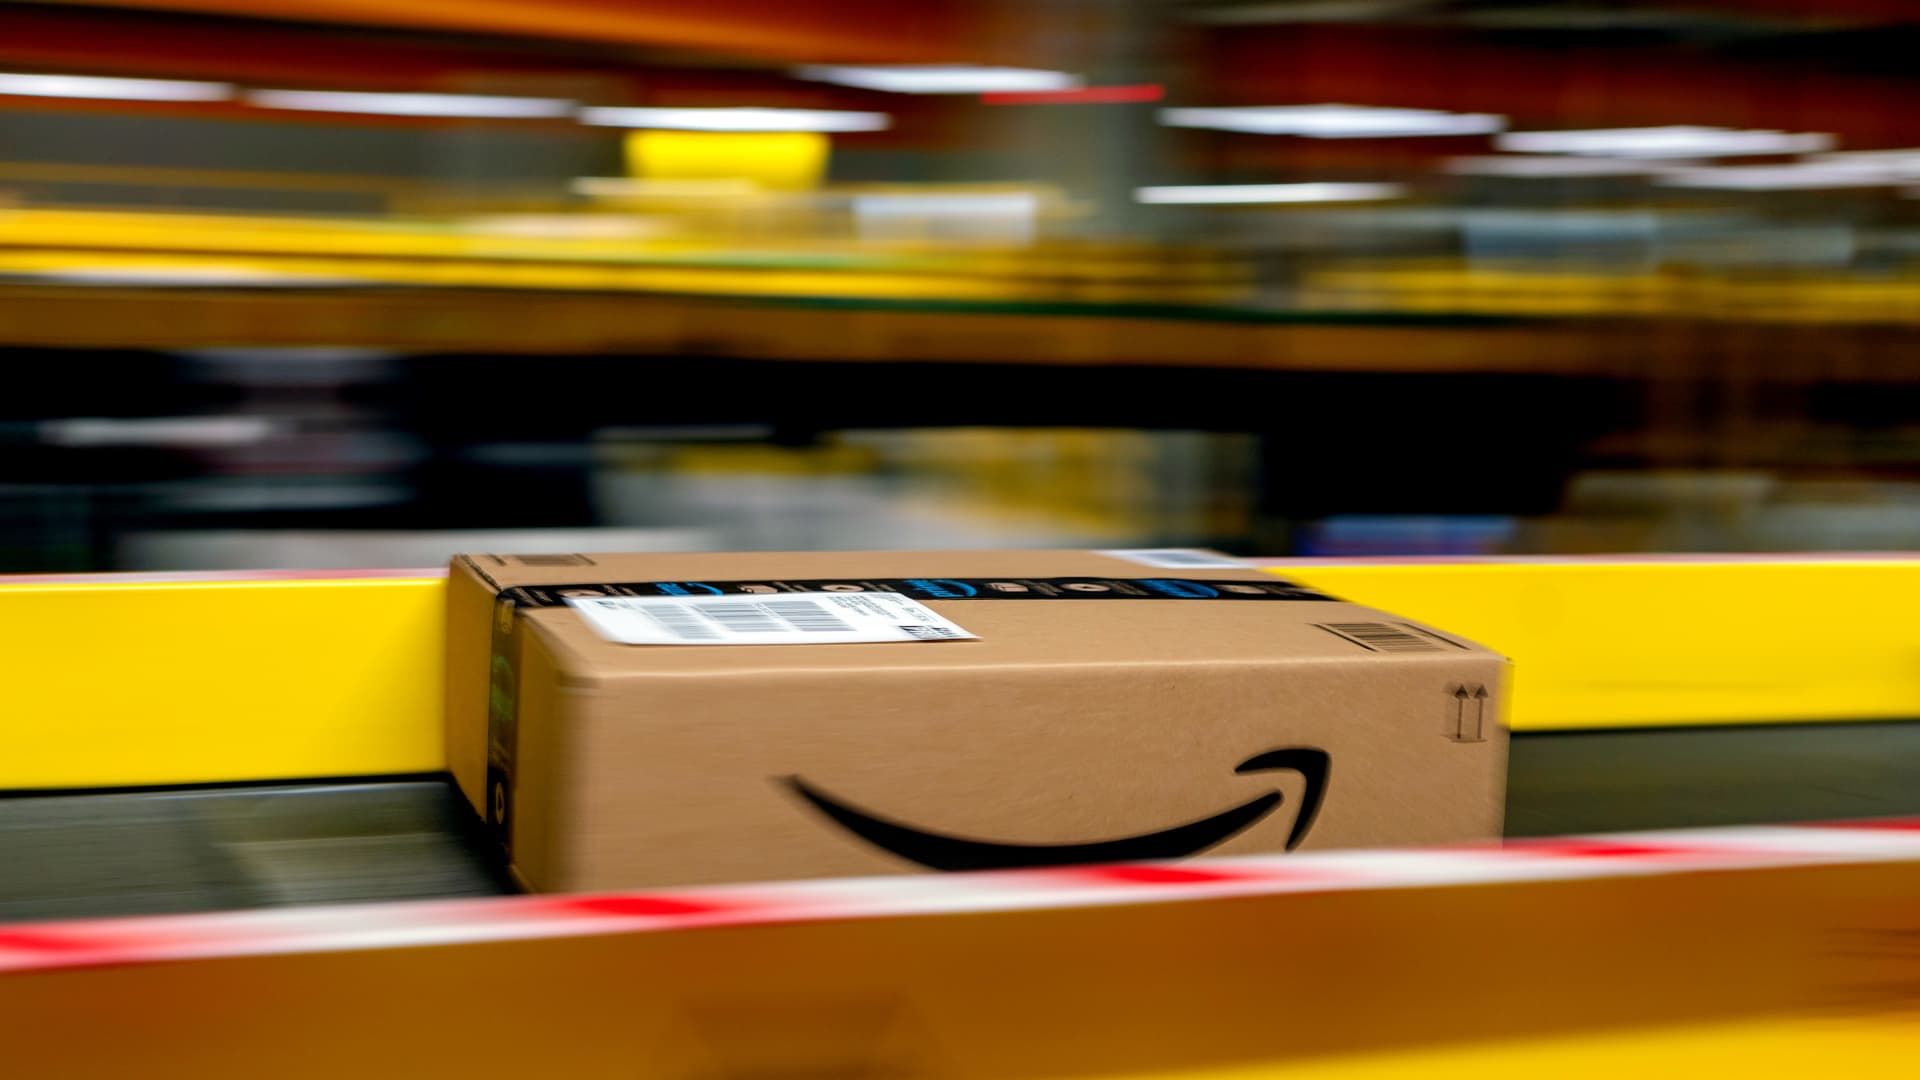 FTC sues Amazon over ‘unfounded’ Prime imprint-up and cancellation path of